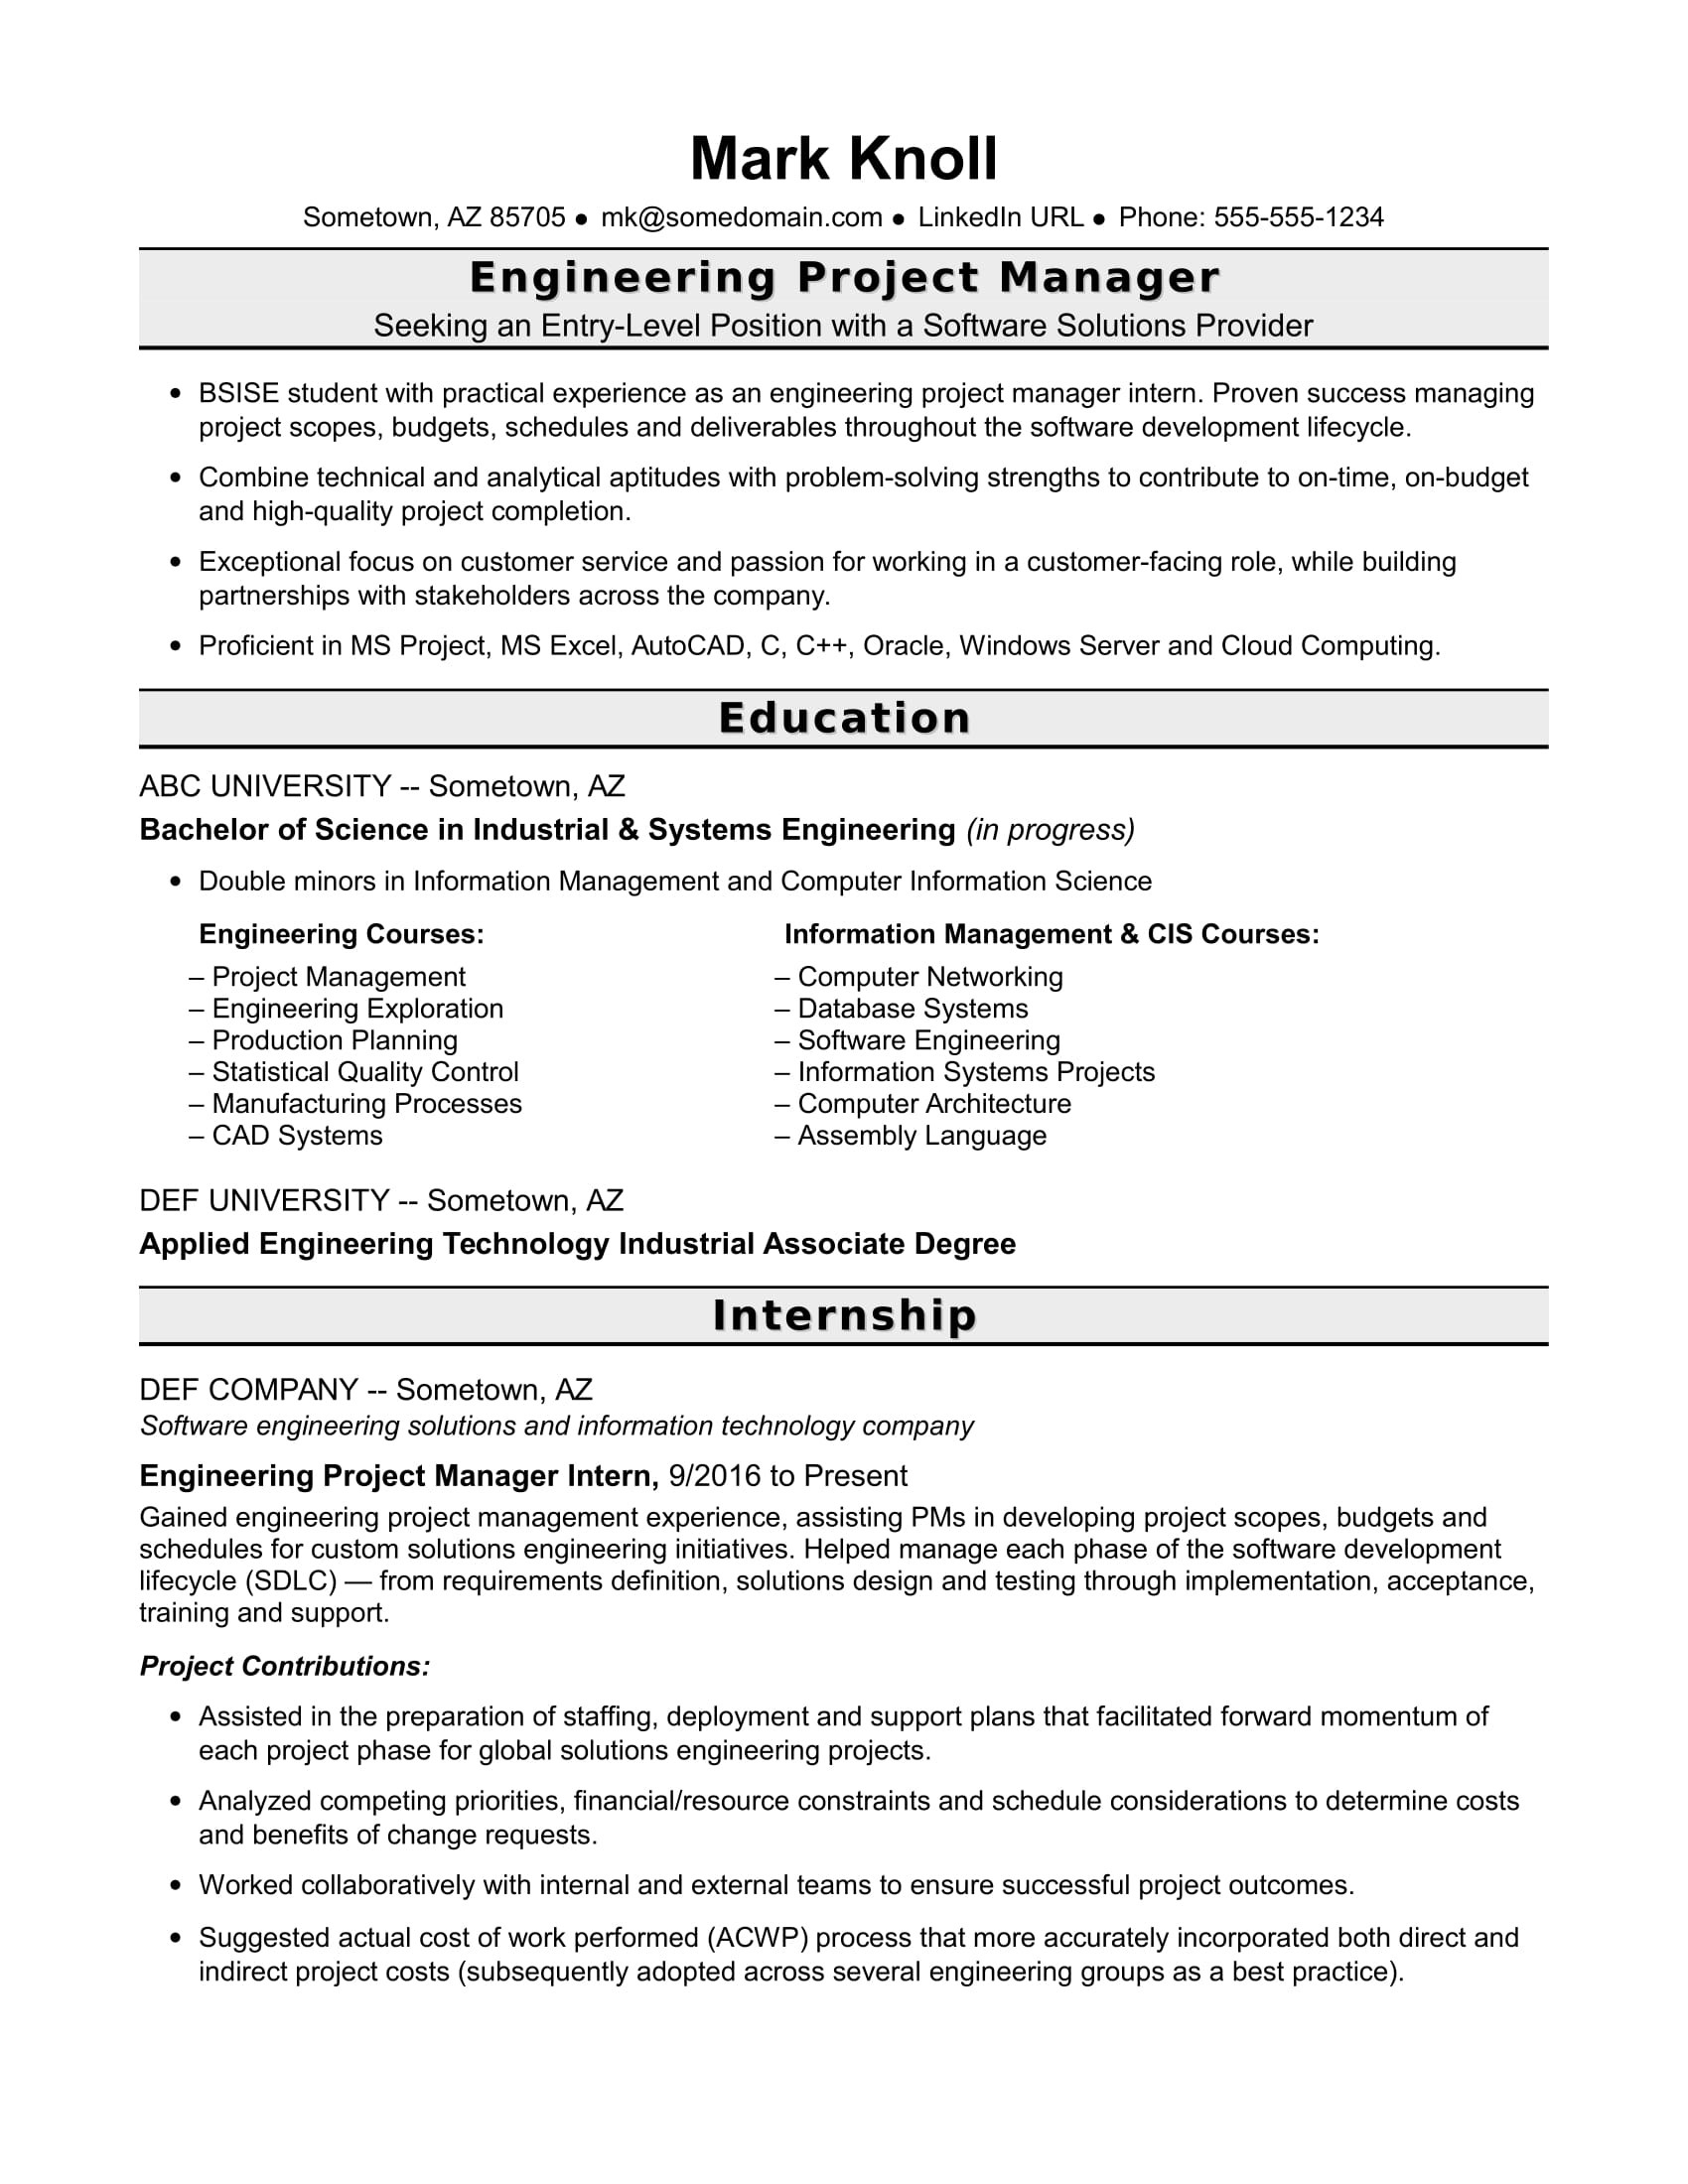 Sample Resume for Program Manager Manufacturing Entry-level Project Manager Resume for Engineers Monster.com